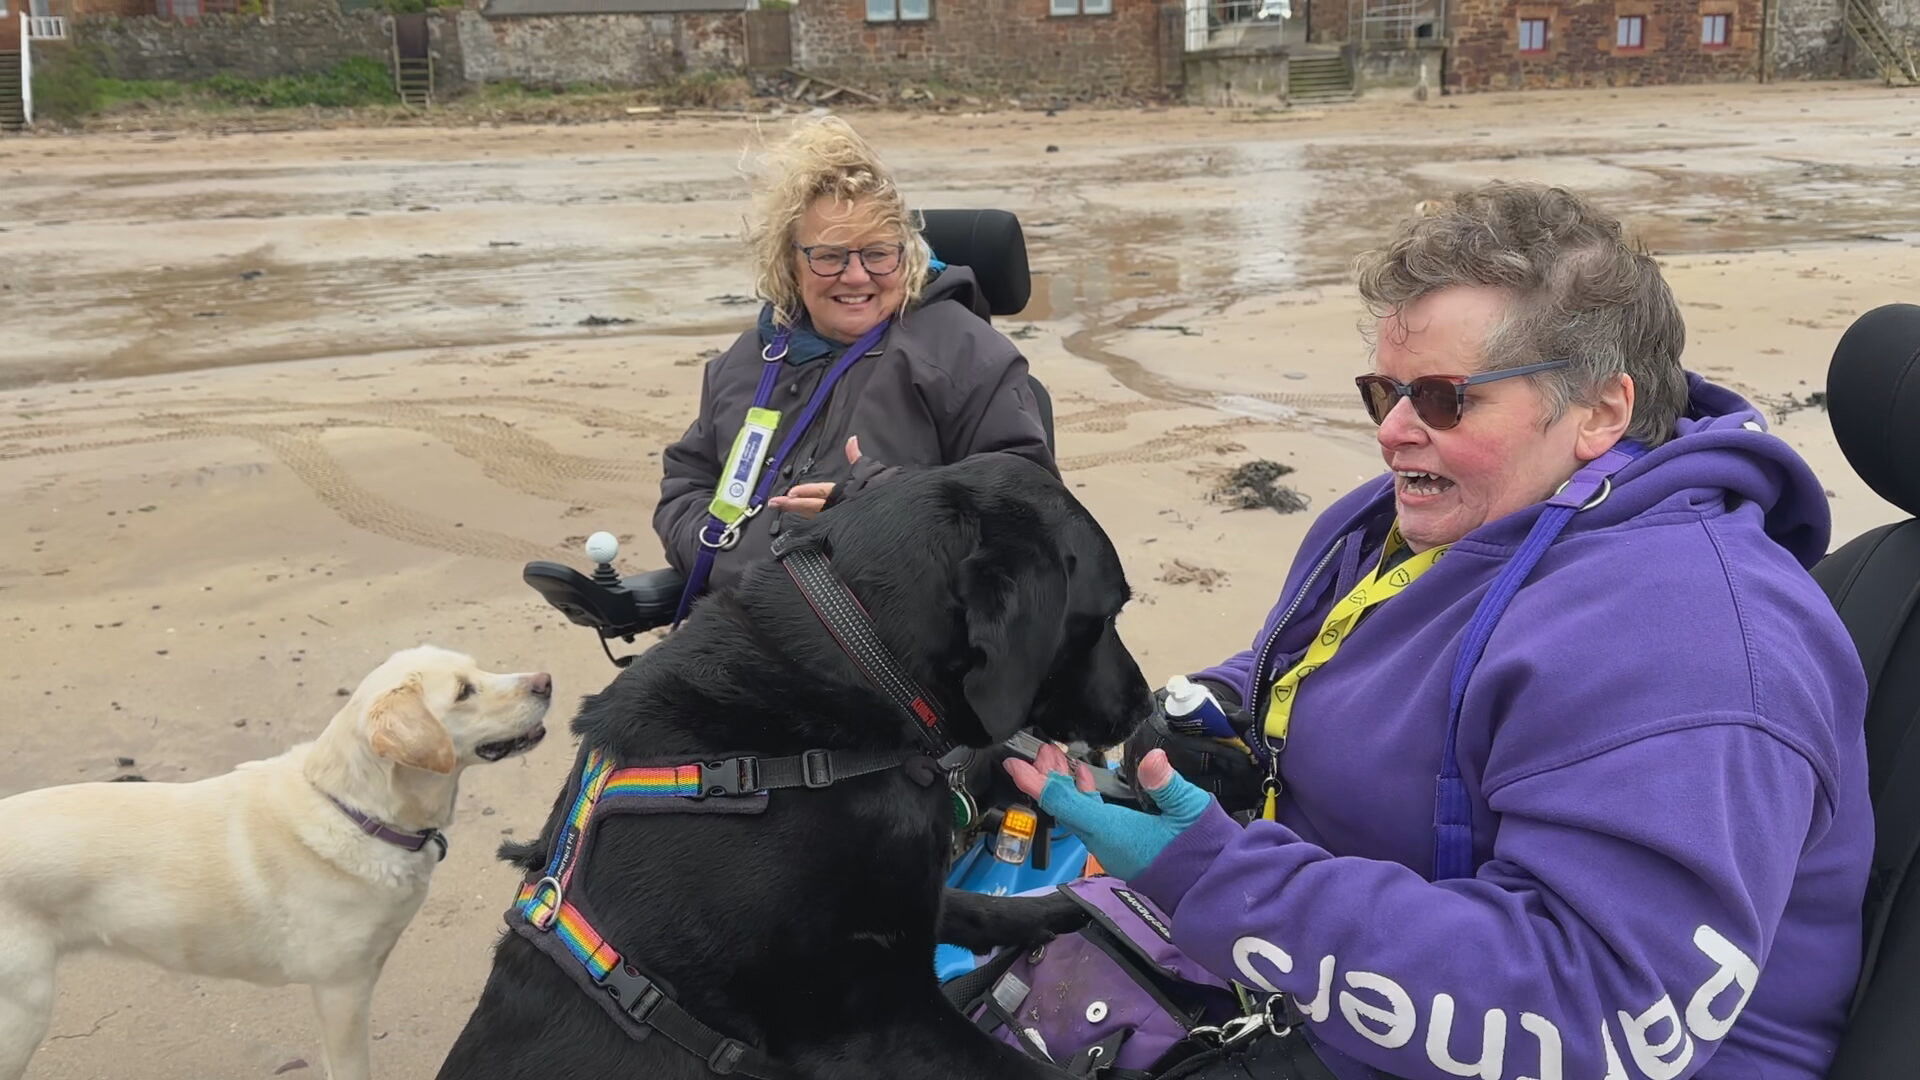 Sally and Wilma enjoying quality time with their assistance dogs on the beach.